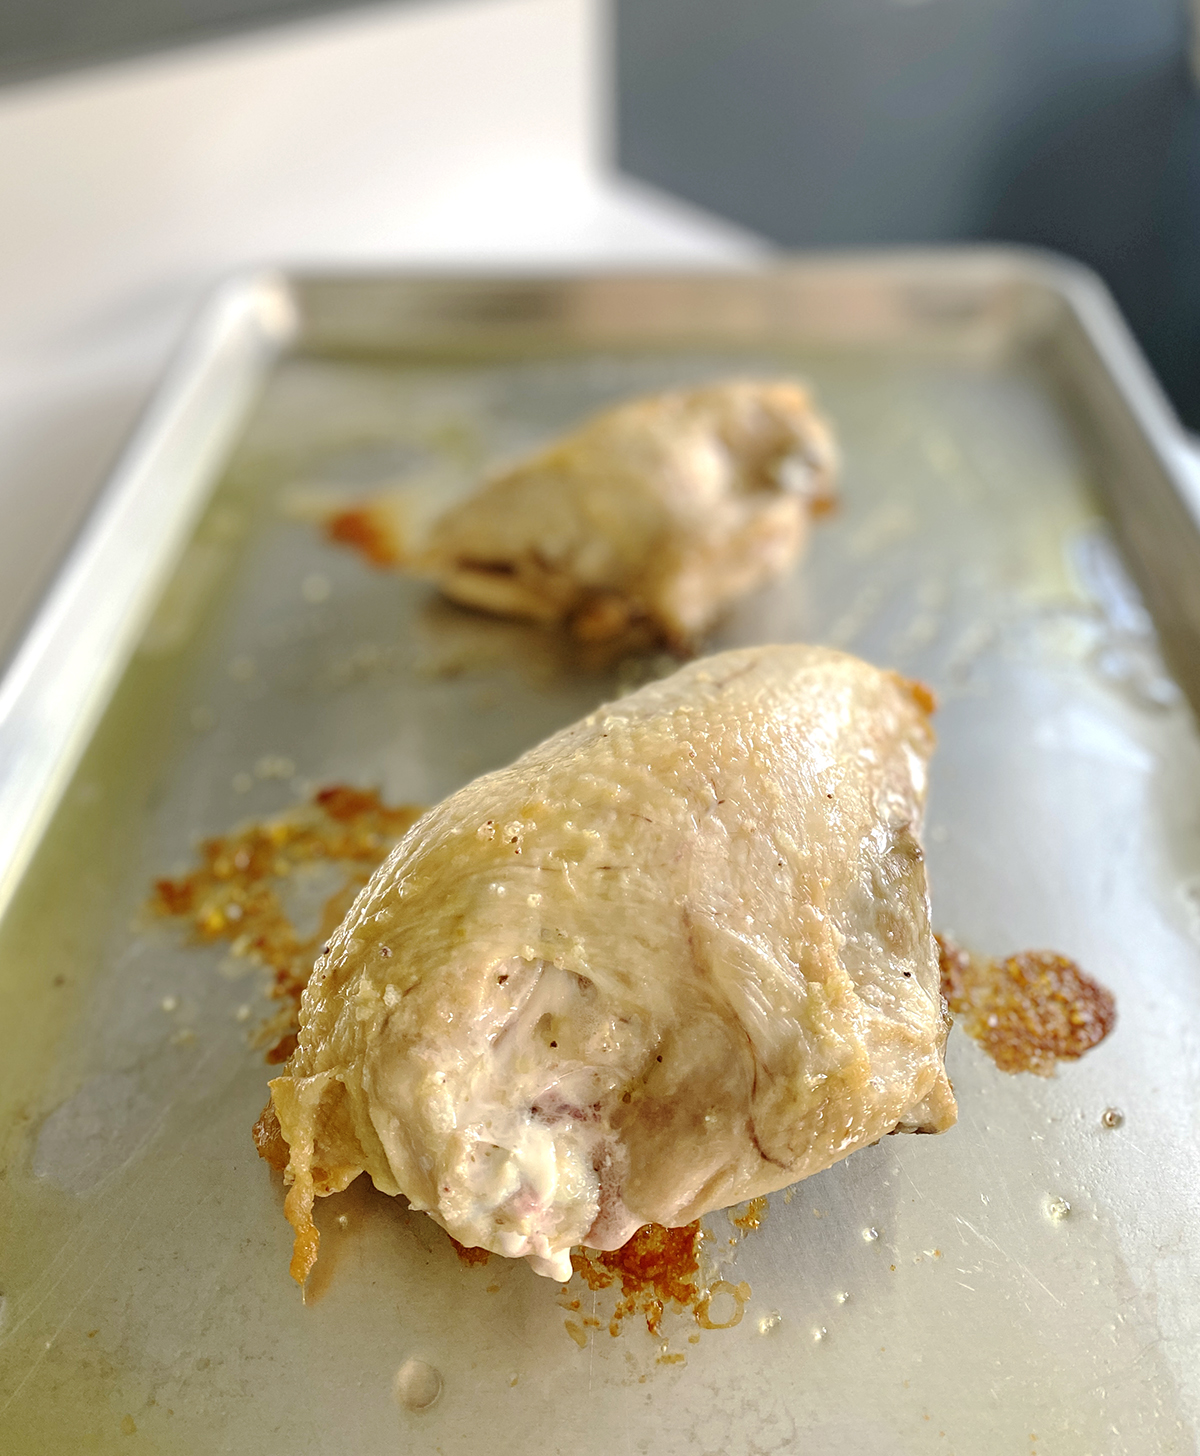 two roasted bone-in and skin-on chicken breasts cooling on a silver roasting pan ready to shred for a creamy chicken salad